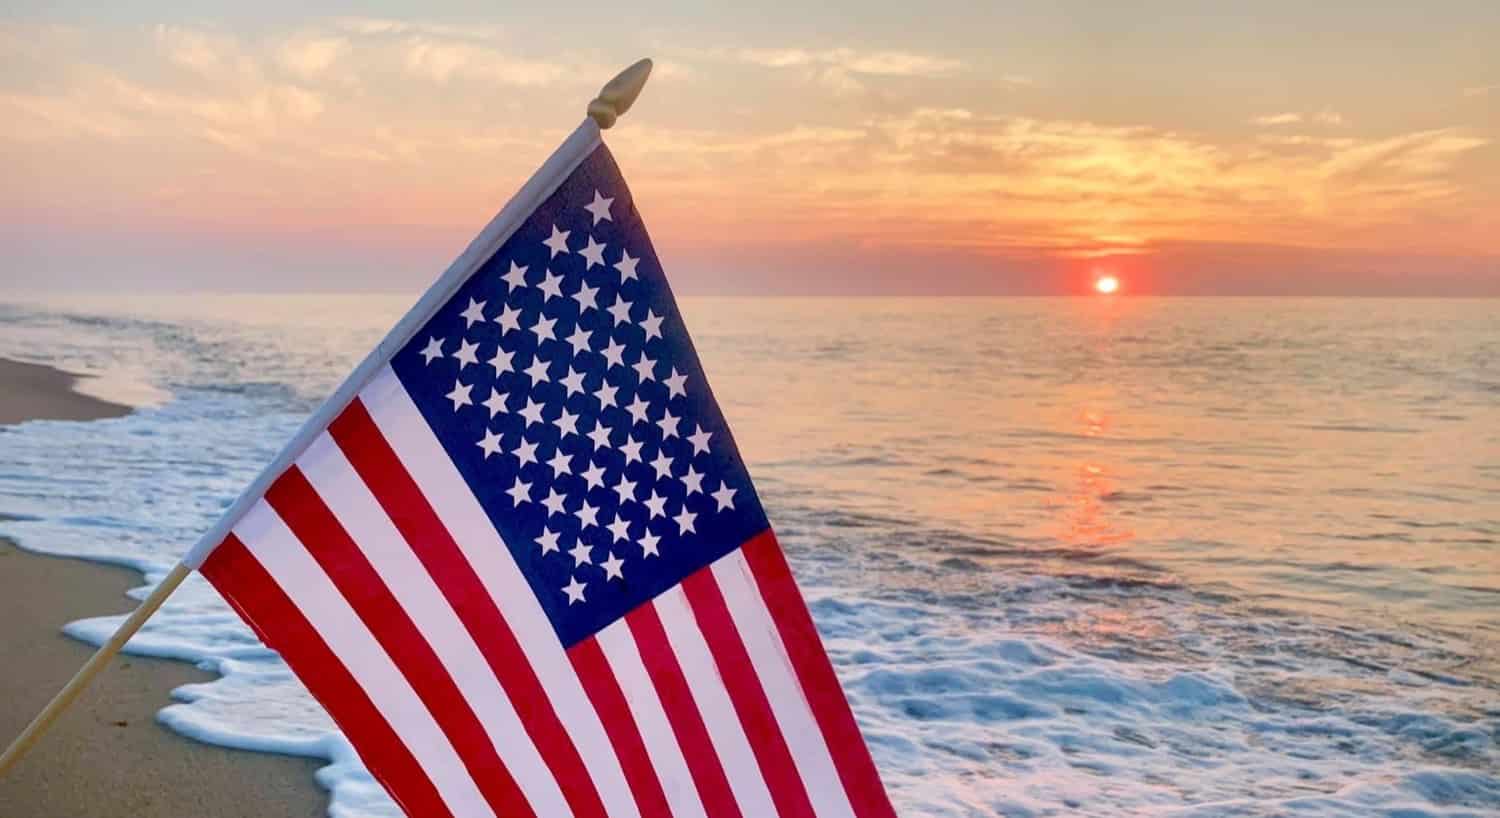 American flag on a pole with the ocean in the background and the sun starting to come up